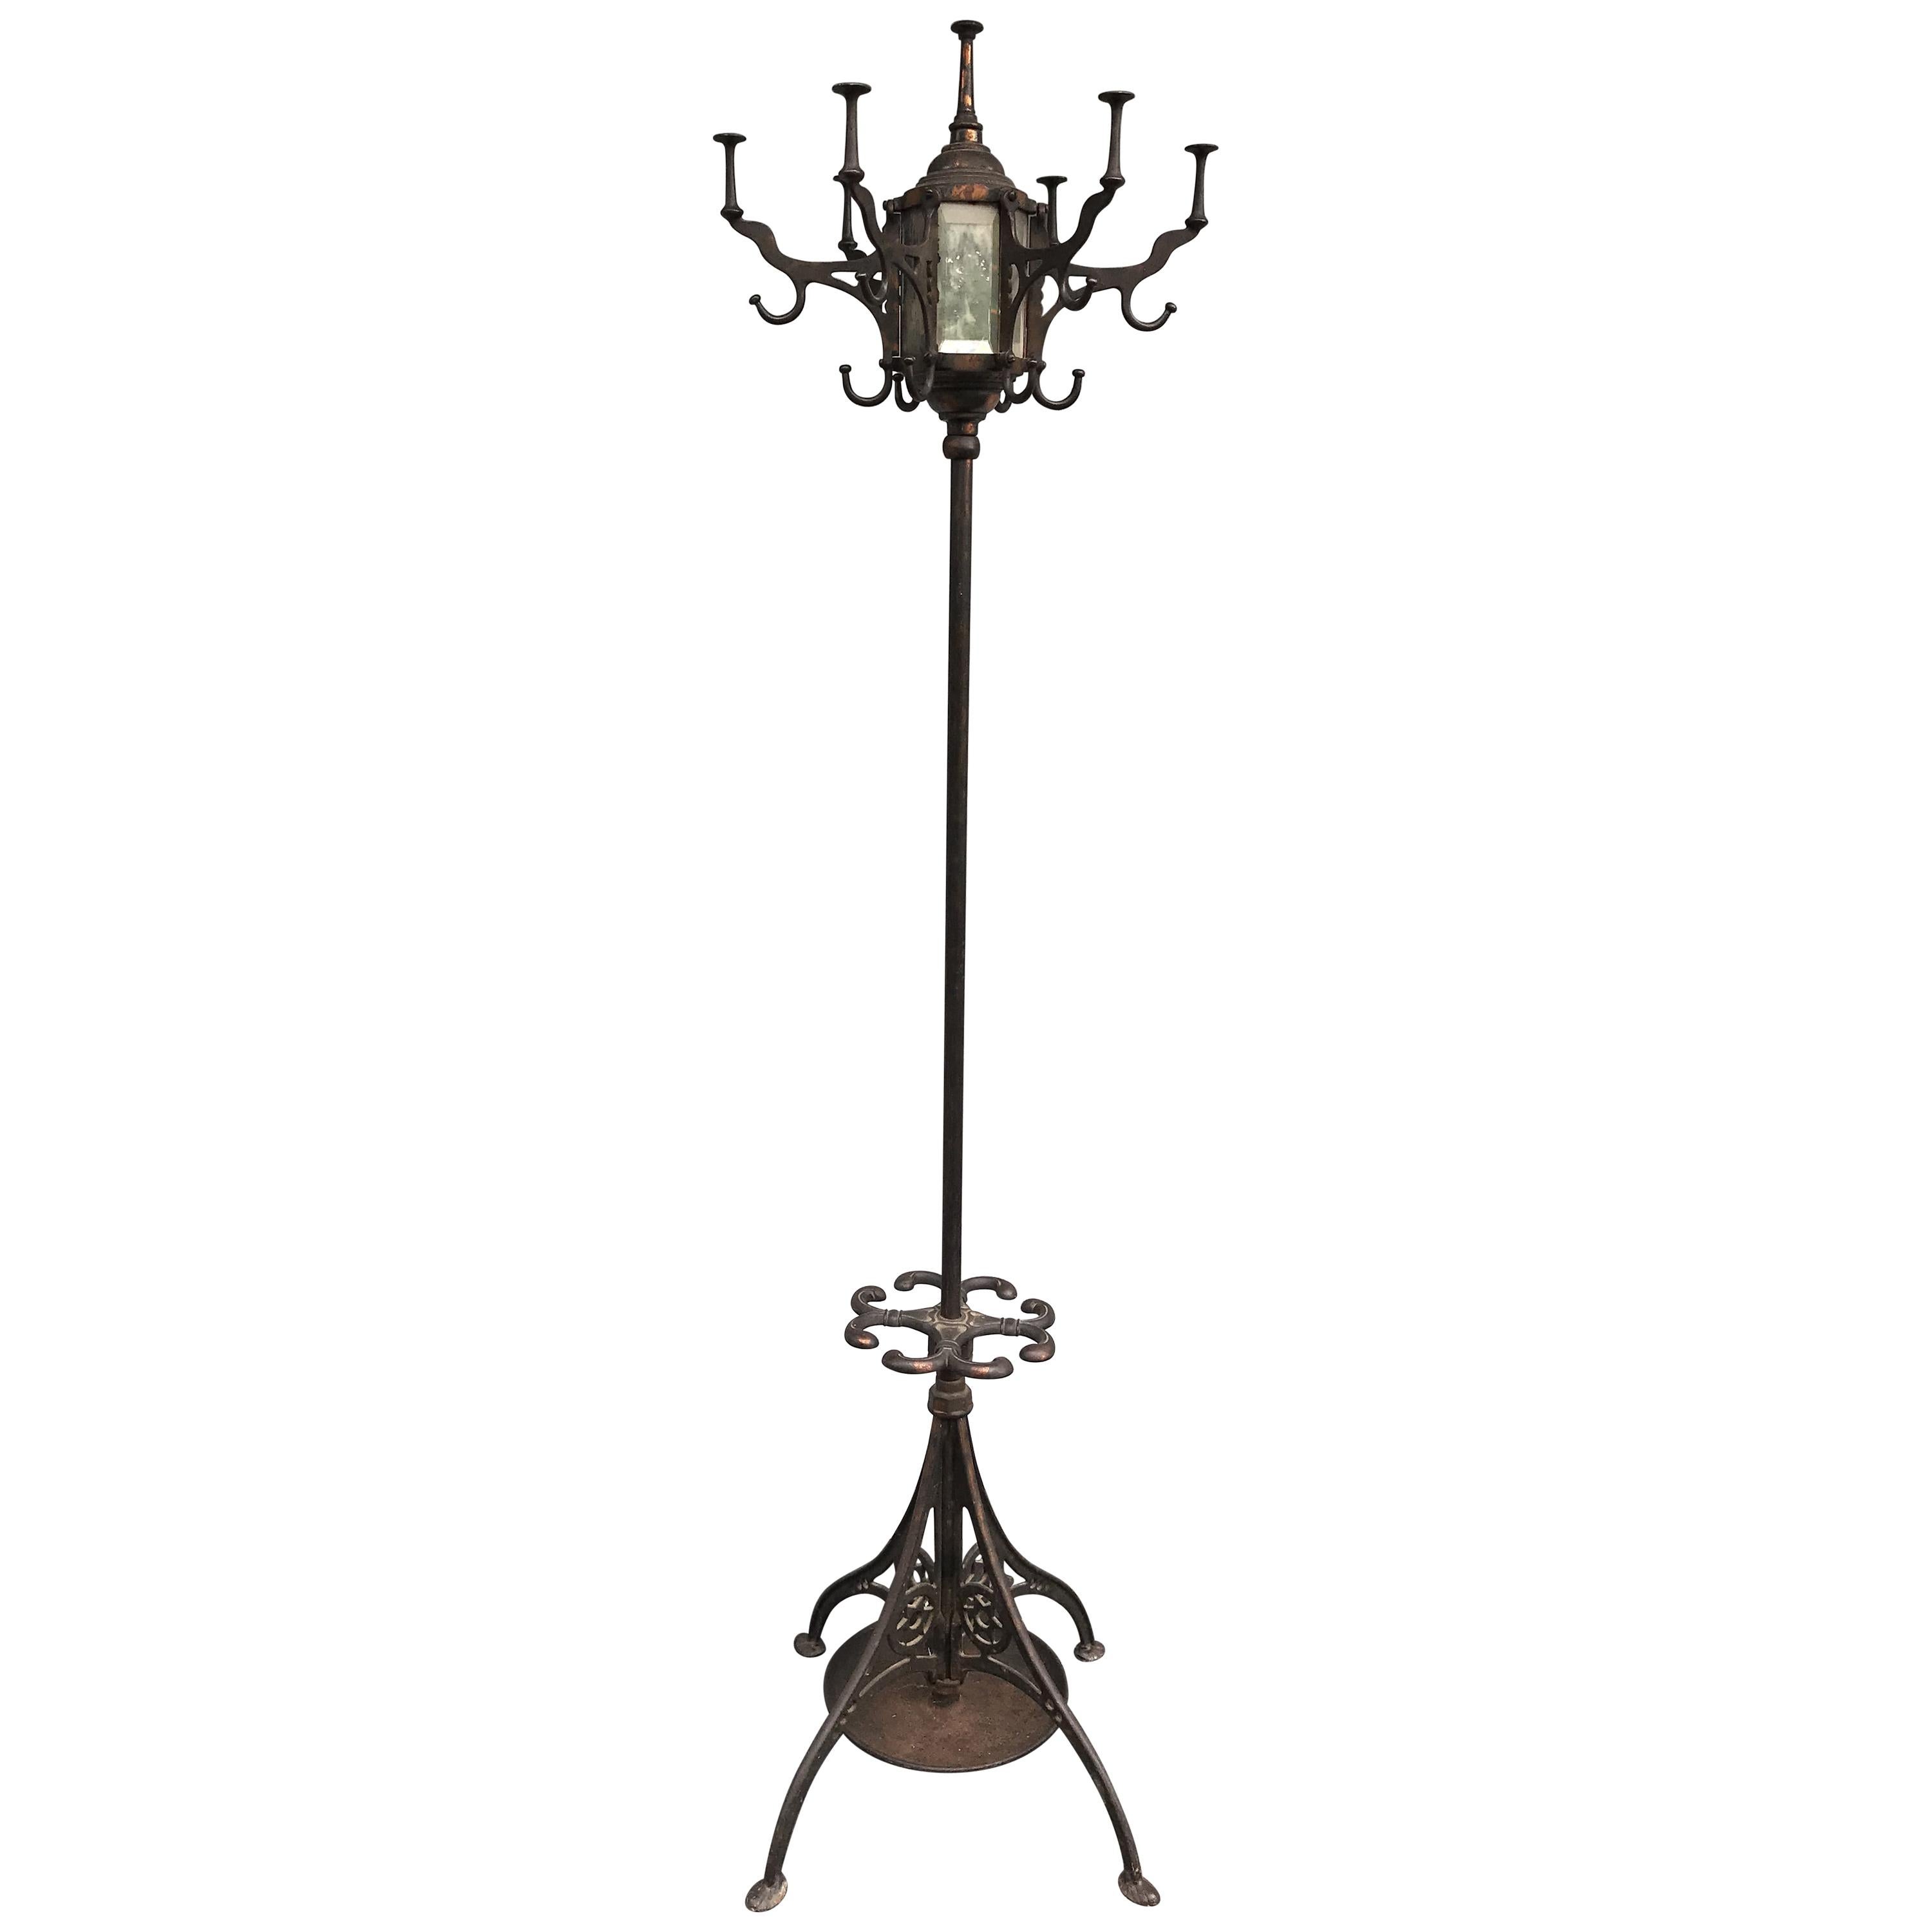 Copper Patinated Metal Coat Tree or Hat Rack with Beveled Panels, circa 1900